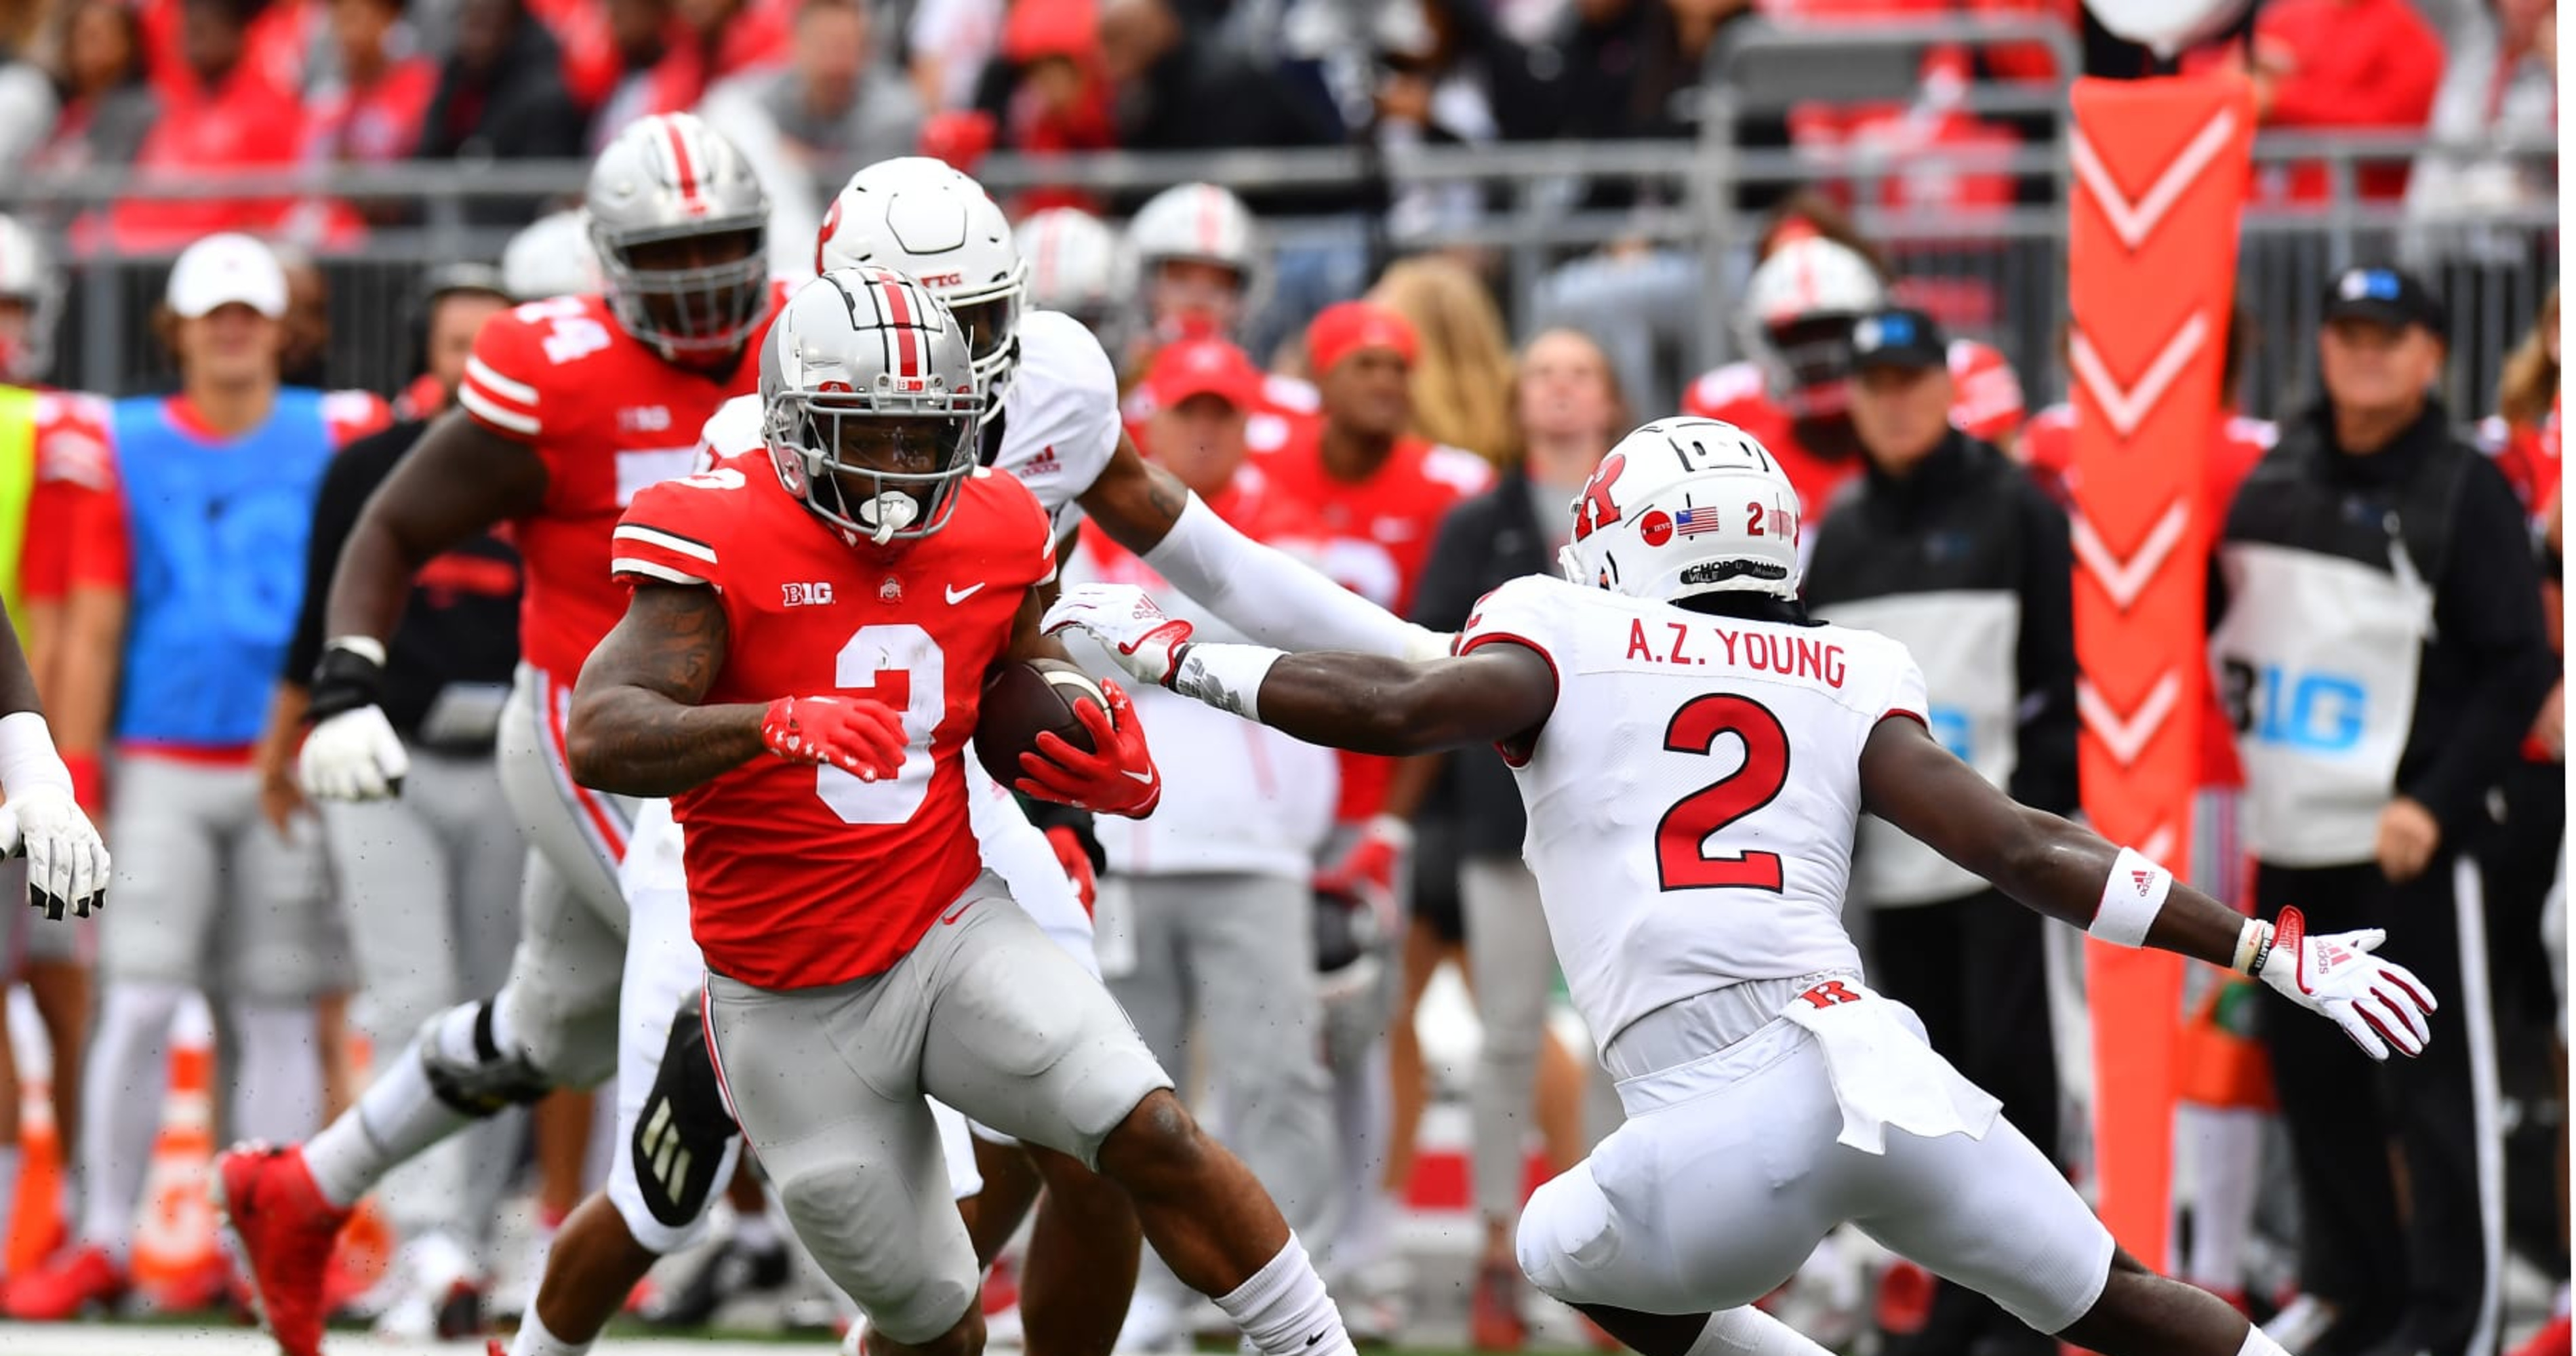 Williams rushes for 5 TDs, No. 3 OSU beats Rutgers 49-10